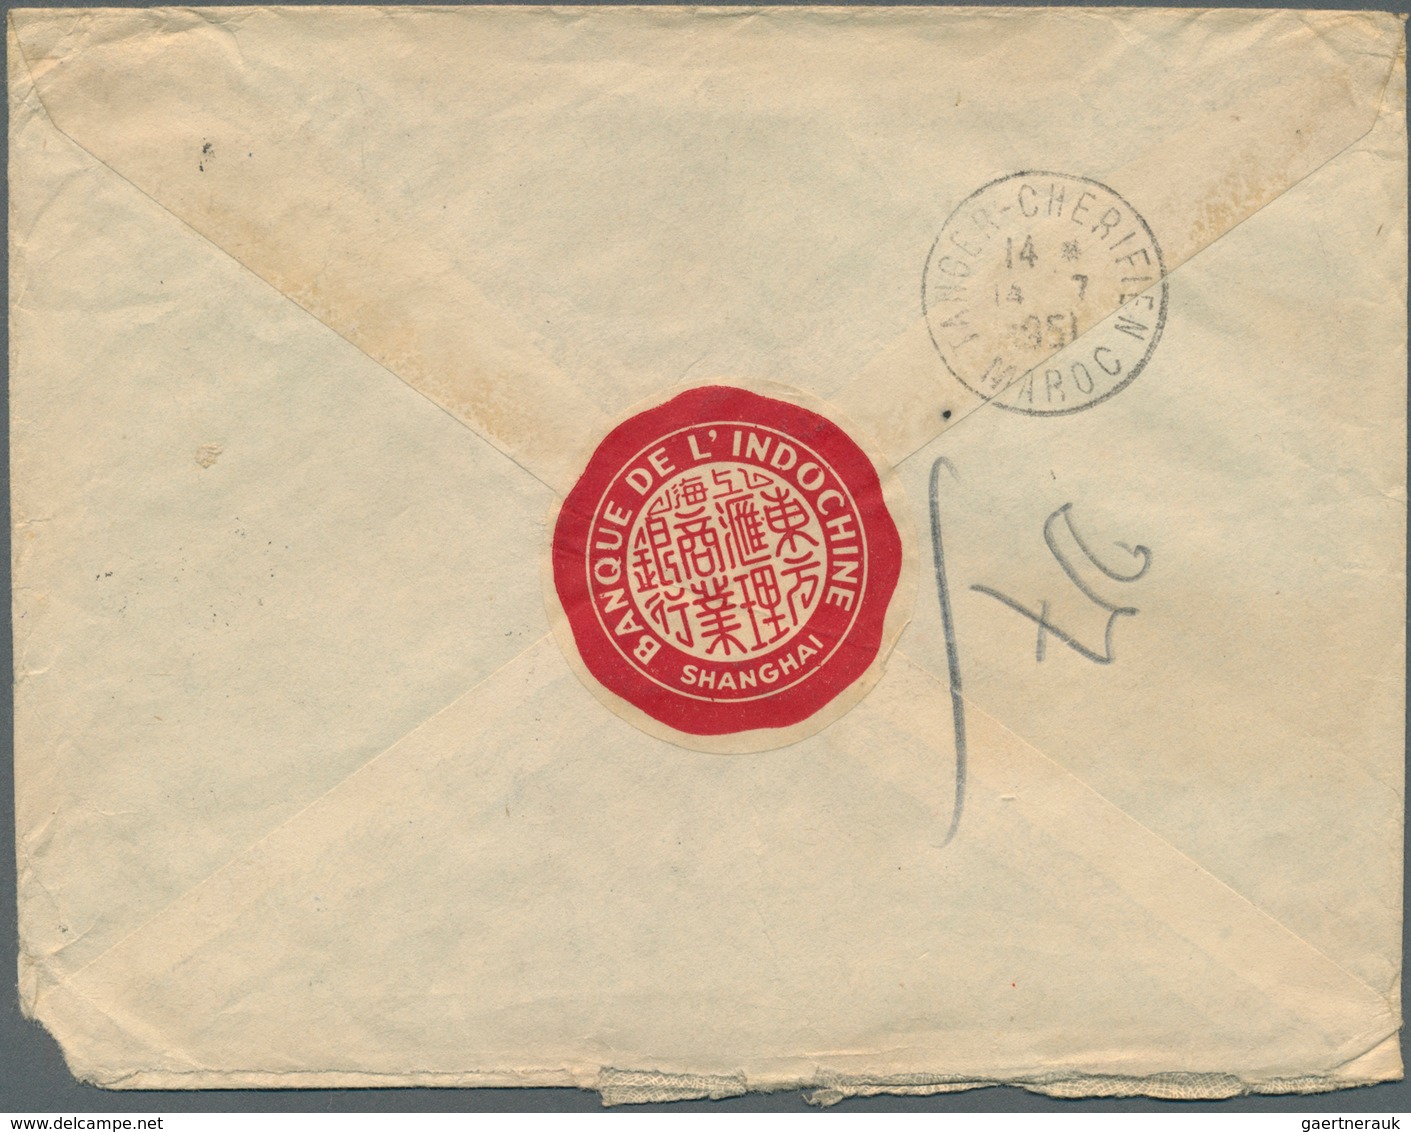 00328 China - Volksrepublik: 1950/53, five air mail covers with Tien An Men issues inc. four registered to